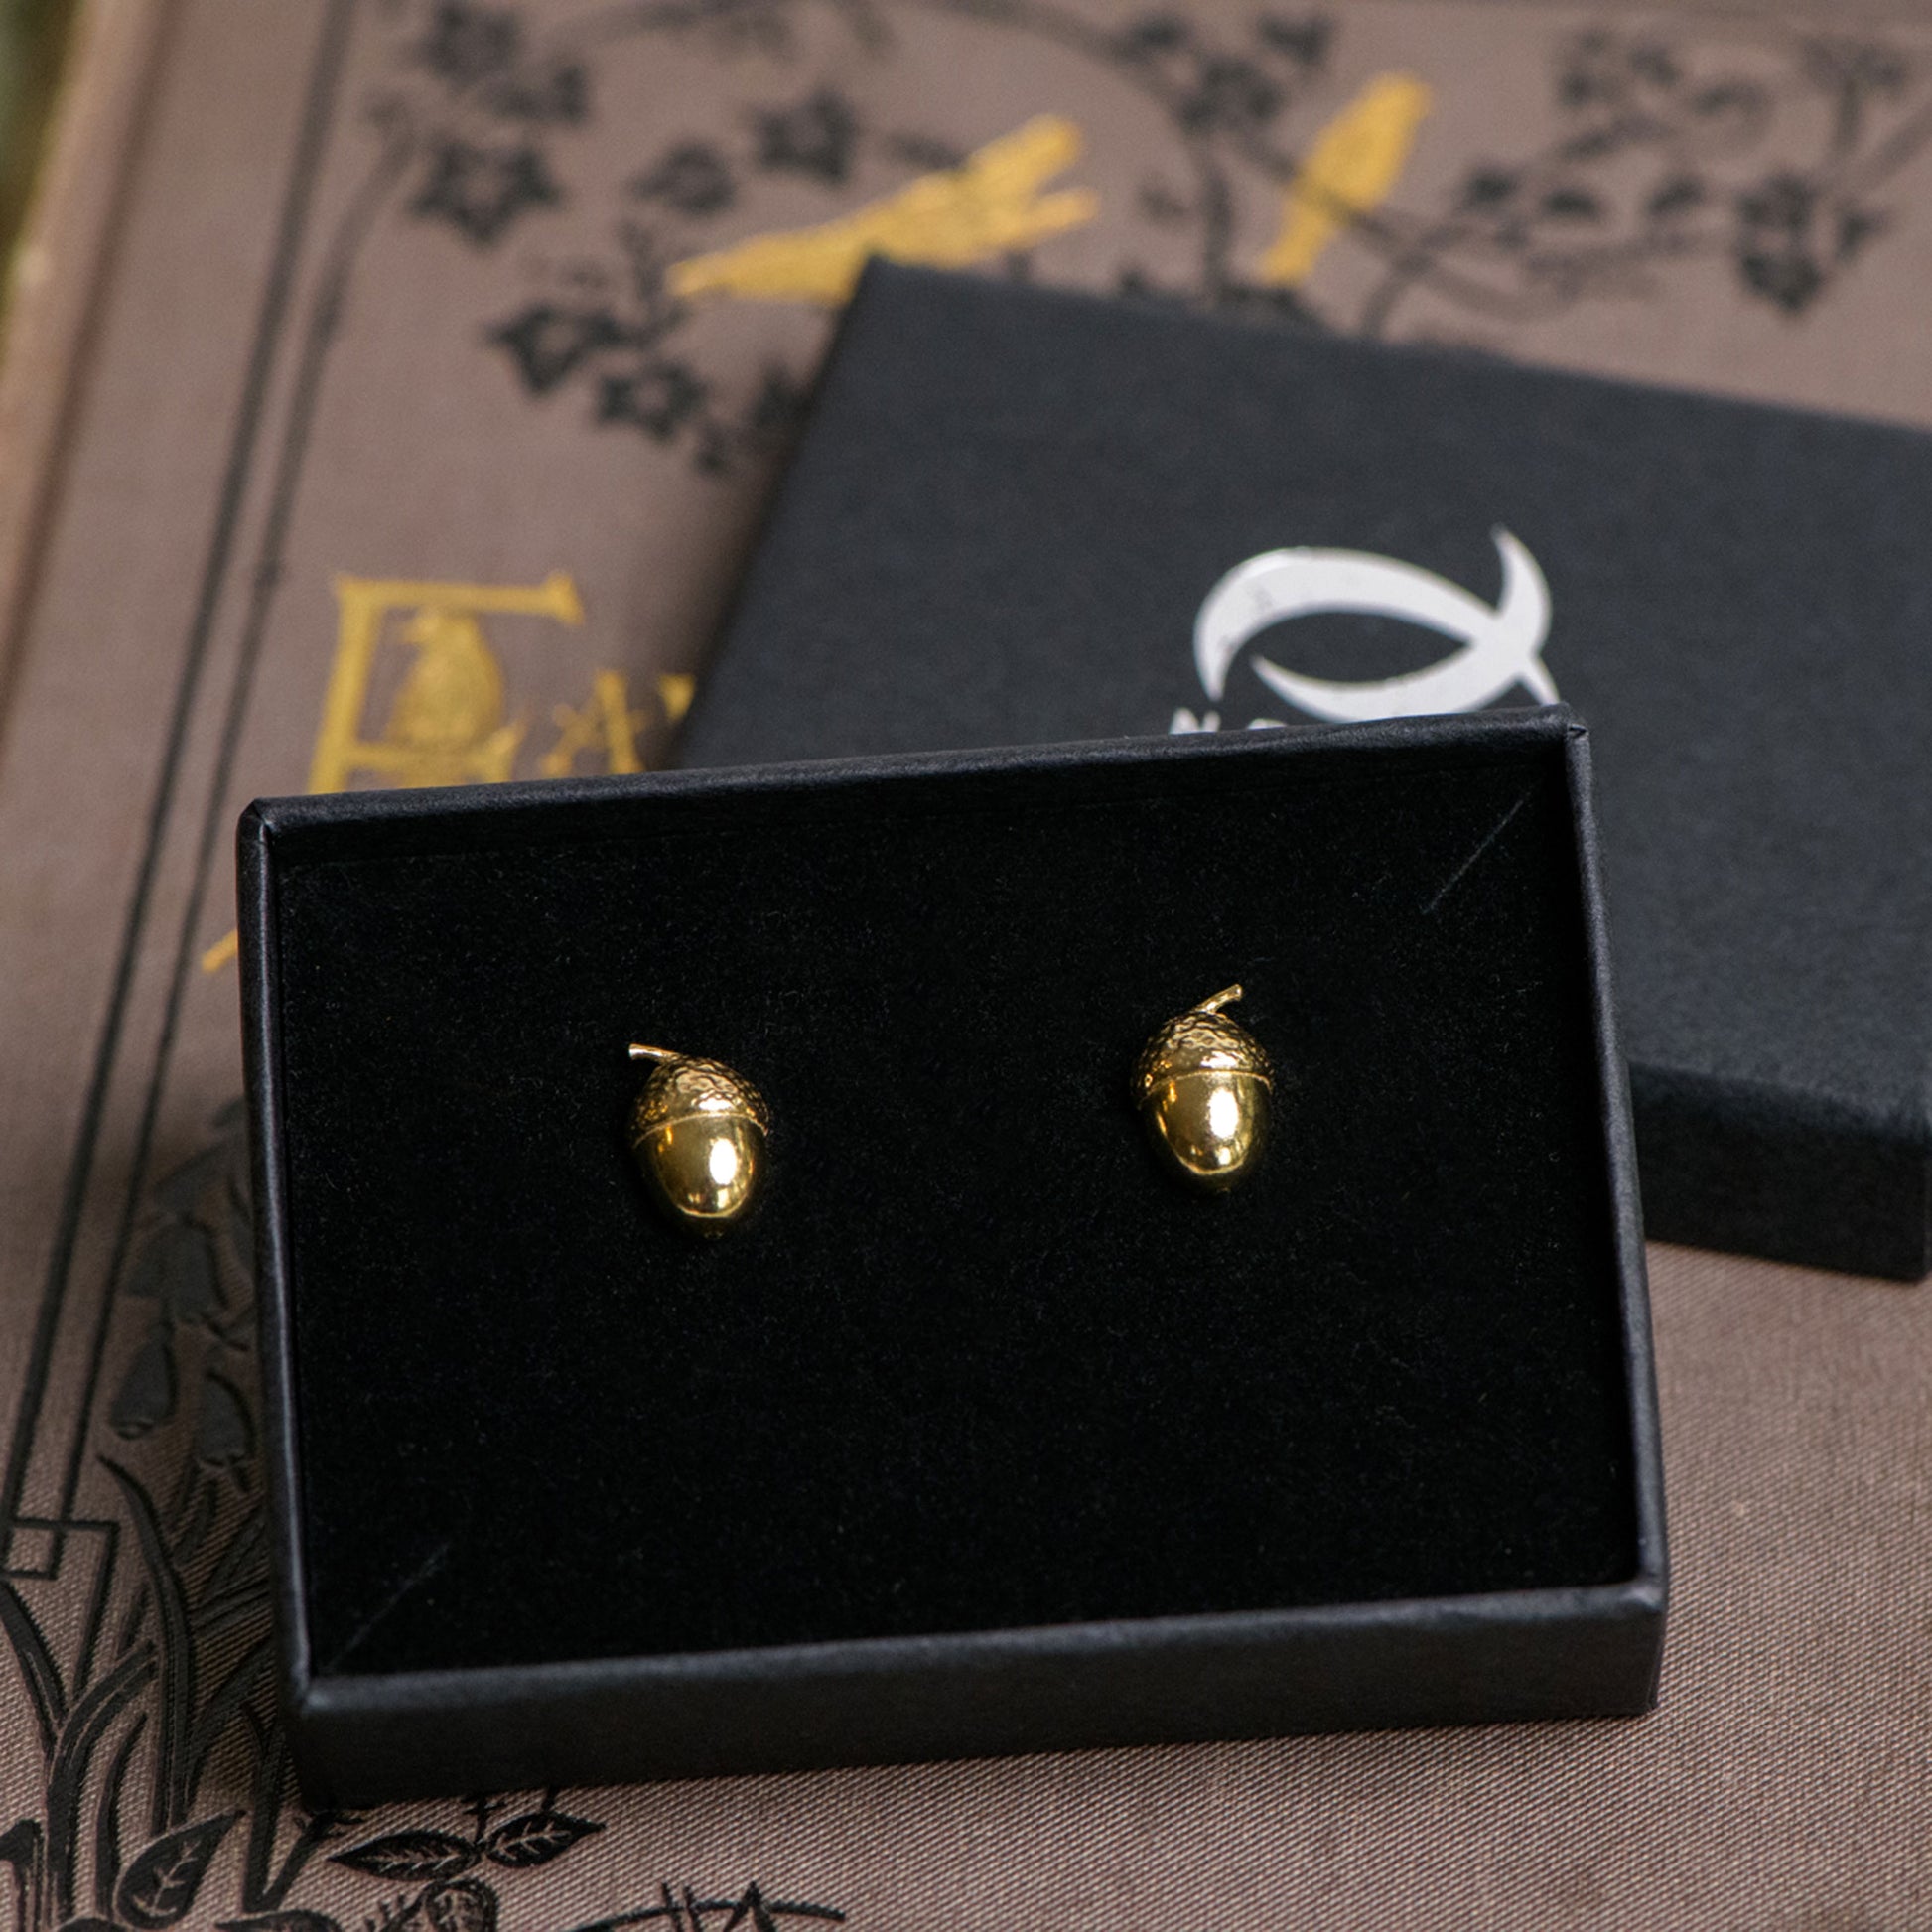 Acorn stud earrings handcrafted from 9ct yellow gold